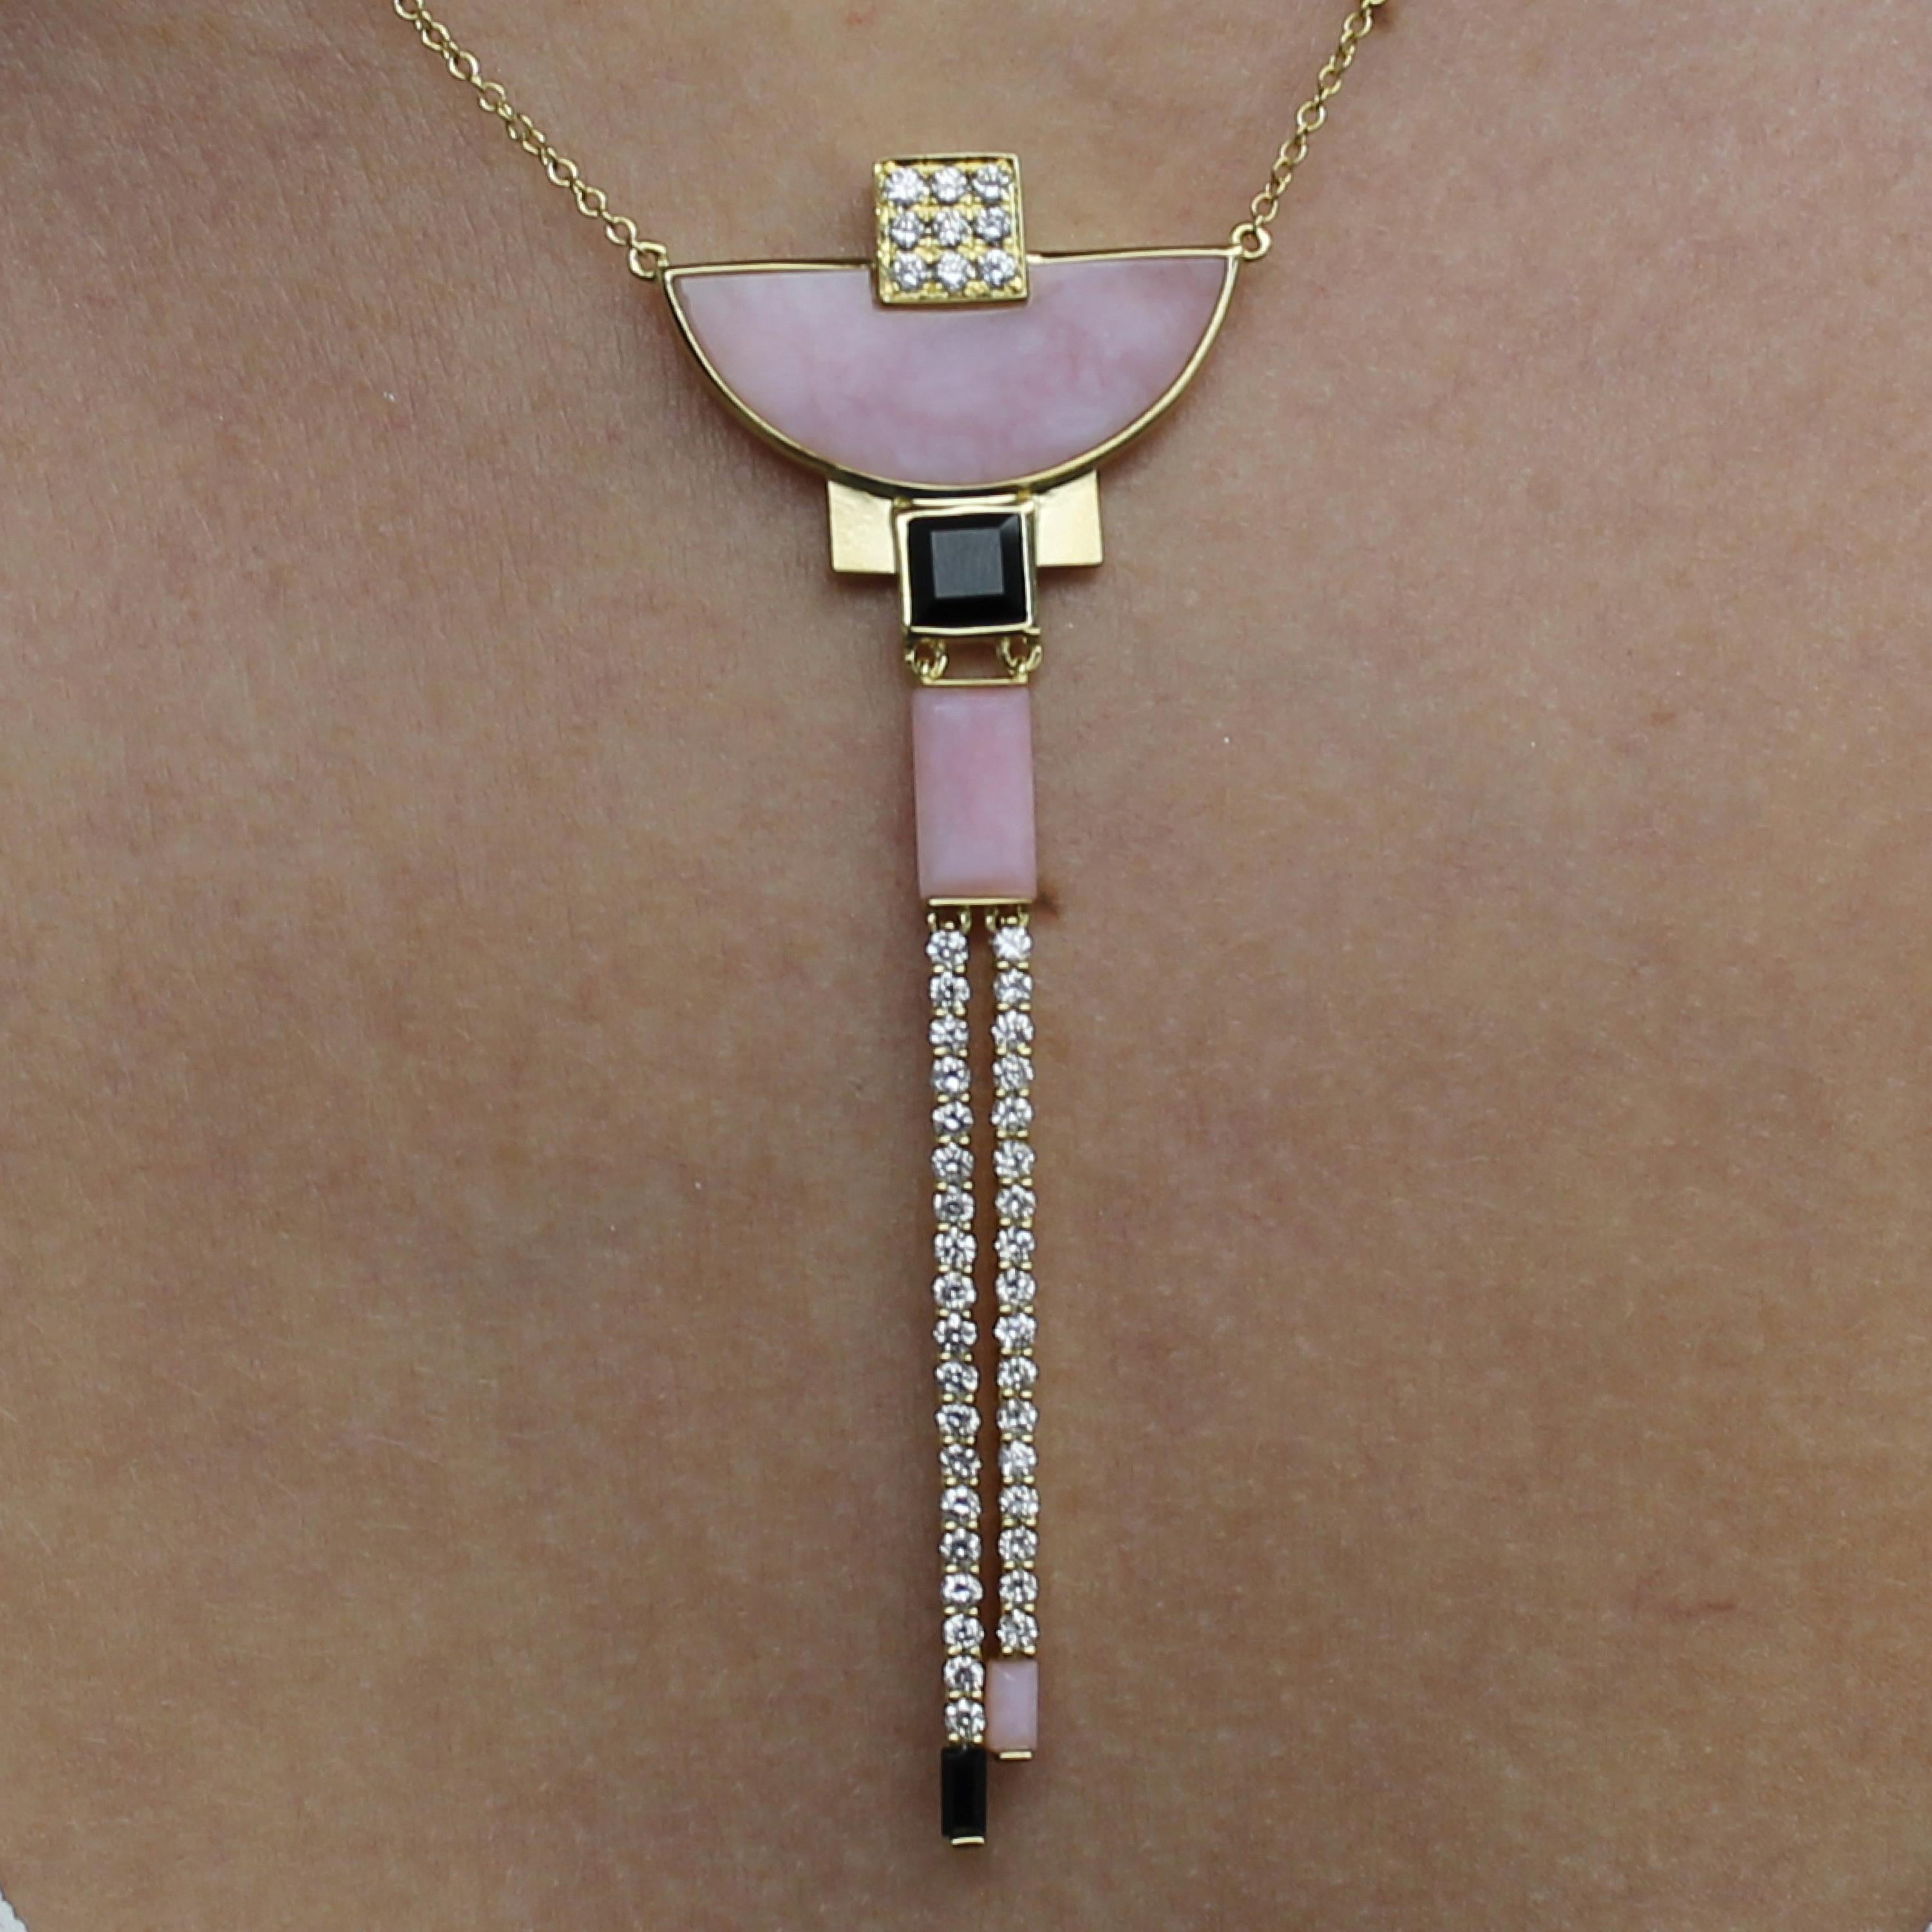 18 Karat Gold Art Deco Style Half-Moon Necklace Pink Opal, Black Onyx, Diamonds In New Condition For Sale In Great Neck, NY